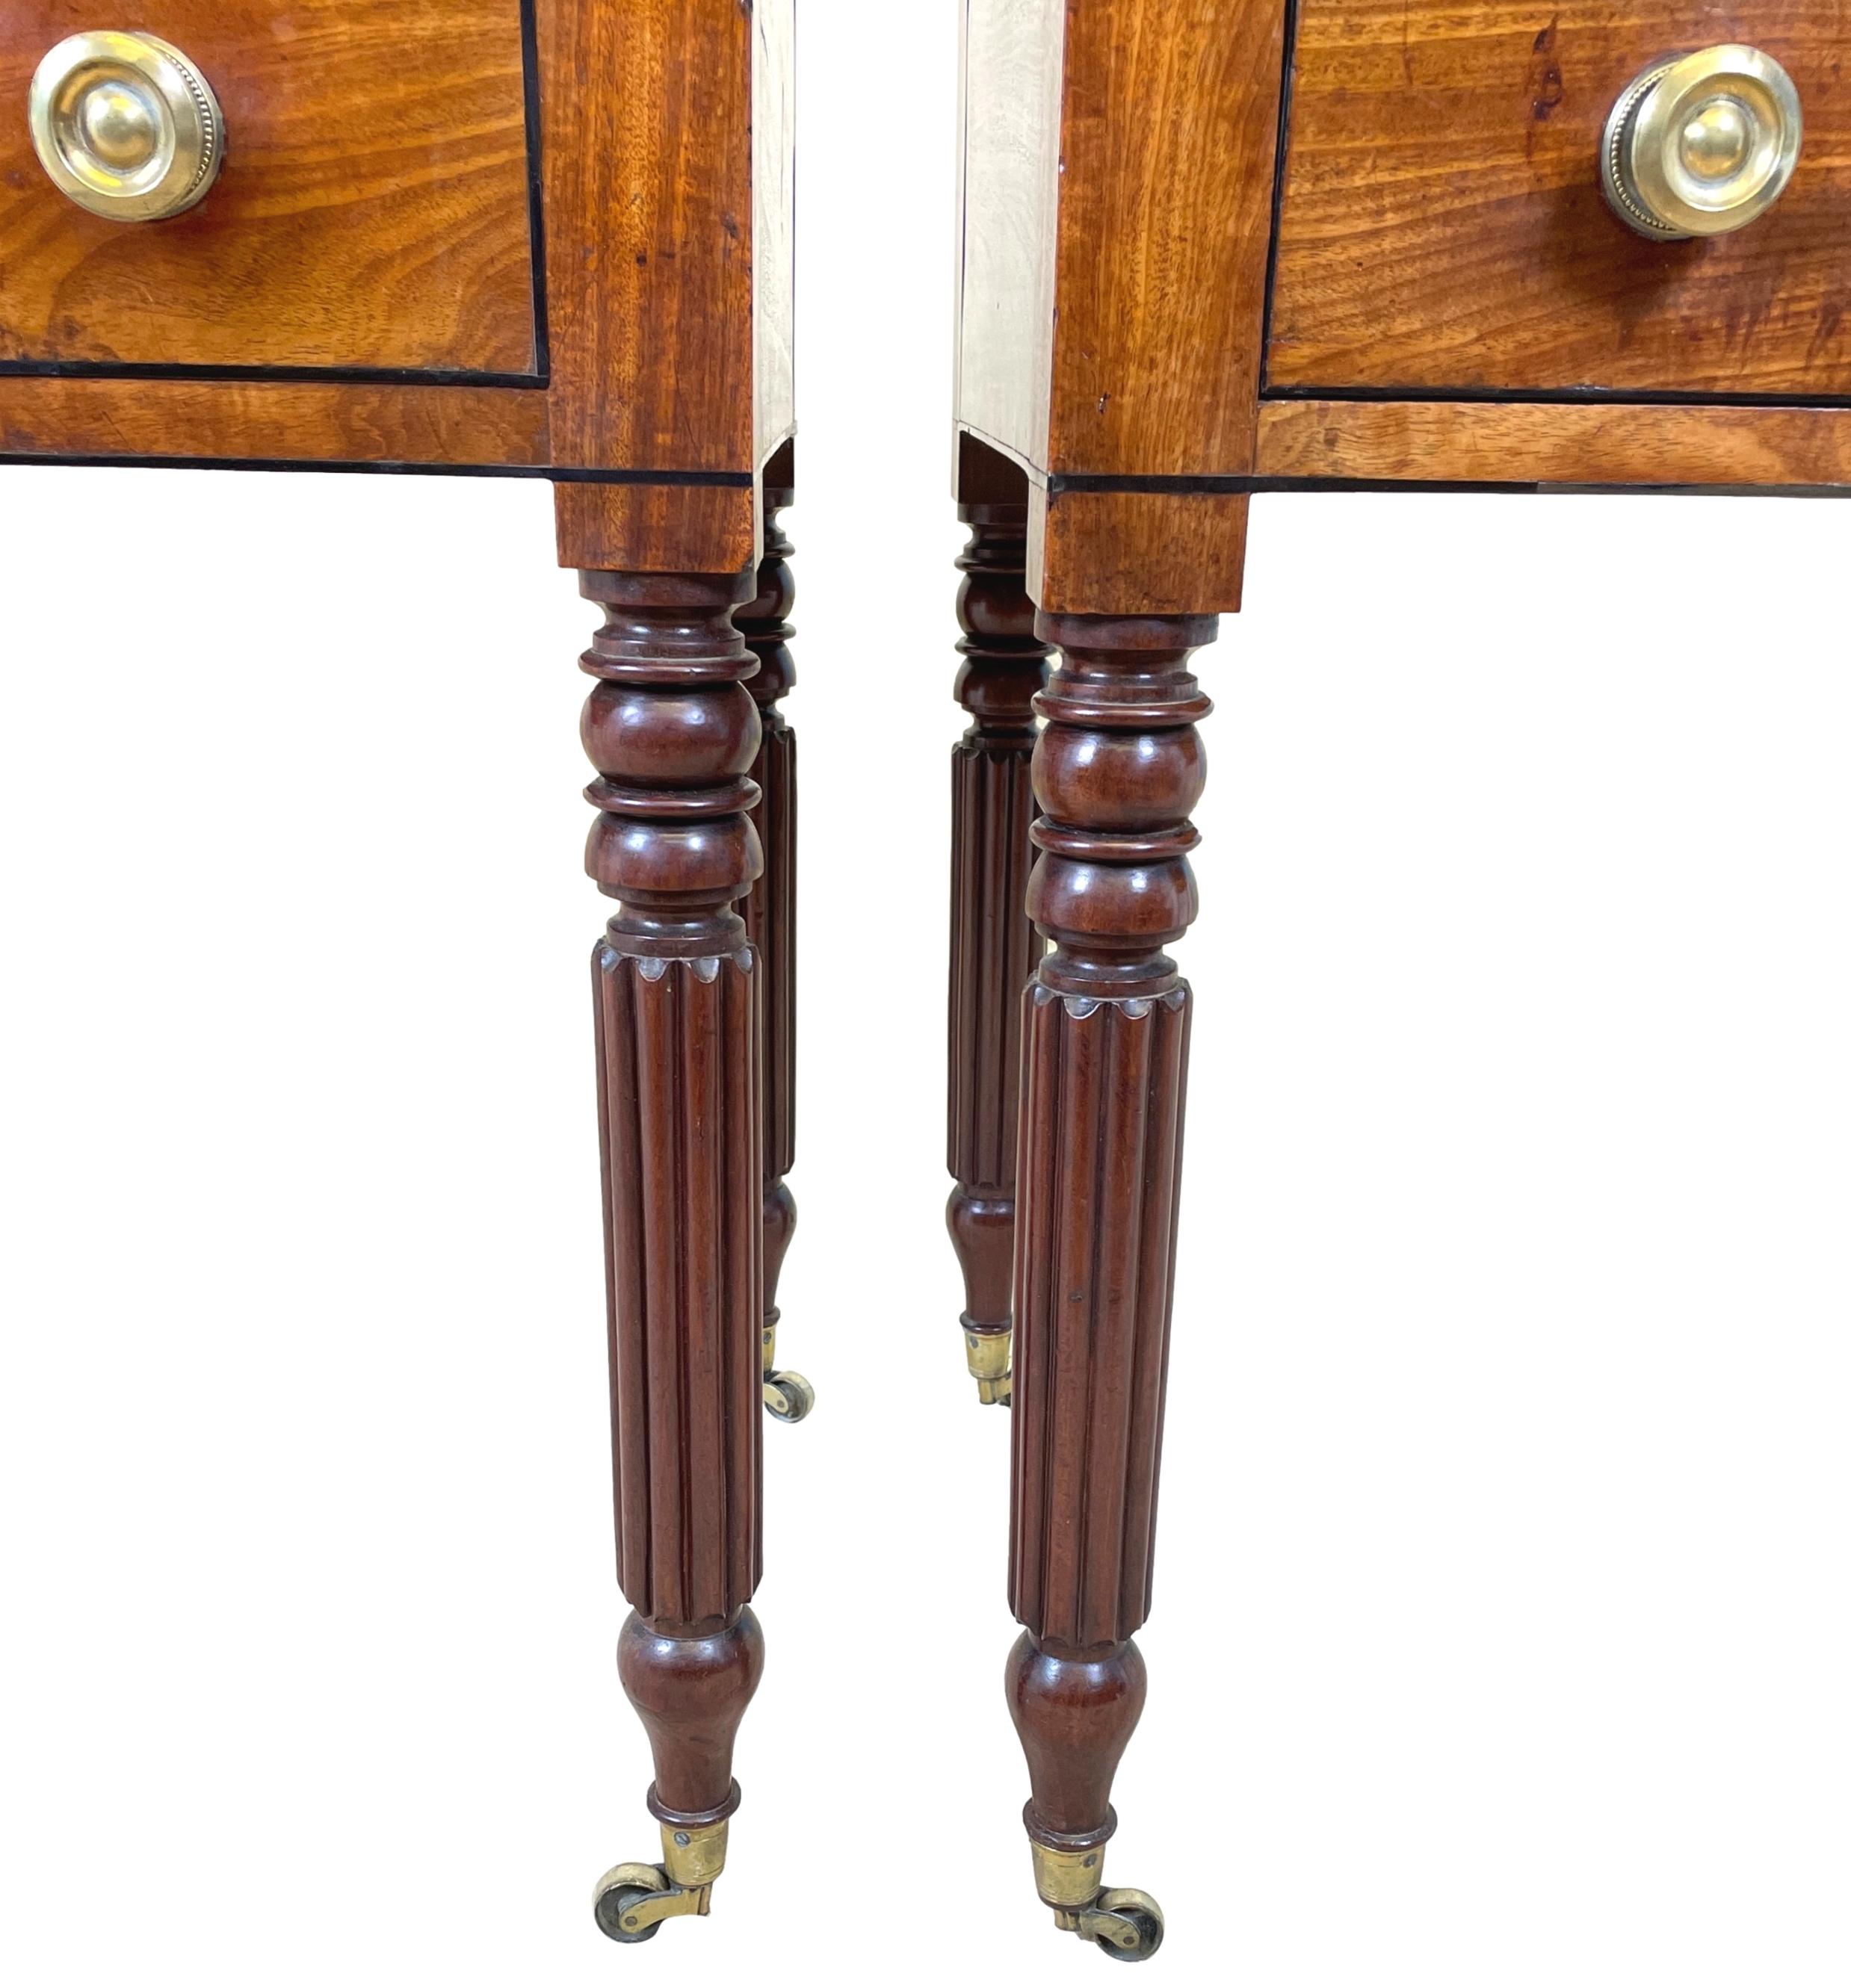 A Stunning Quality And Extremely Rare Pair Of 19th Century Regency Period Mahogany Dressing Tables, Of Elegant Concave Form, With Superbly Figured Gallery Tops Over Five Drawers With Original Turned Brass Knobs, Raised On Elegant Turned And Reeded